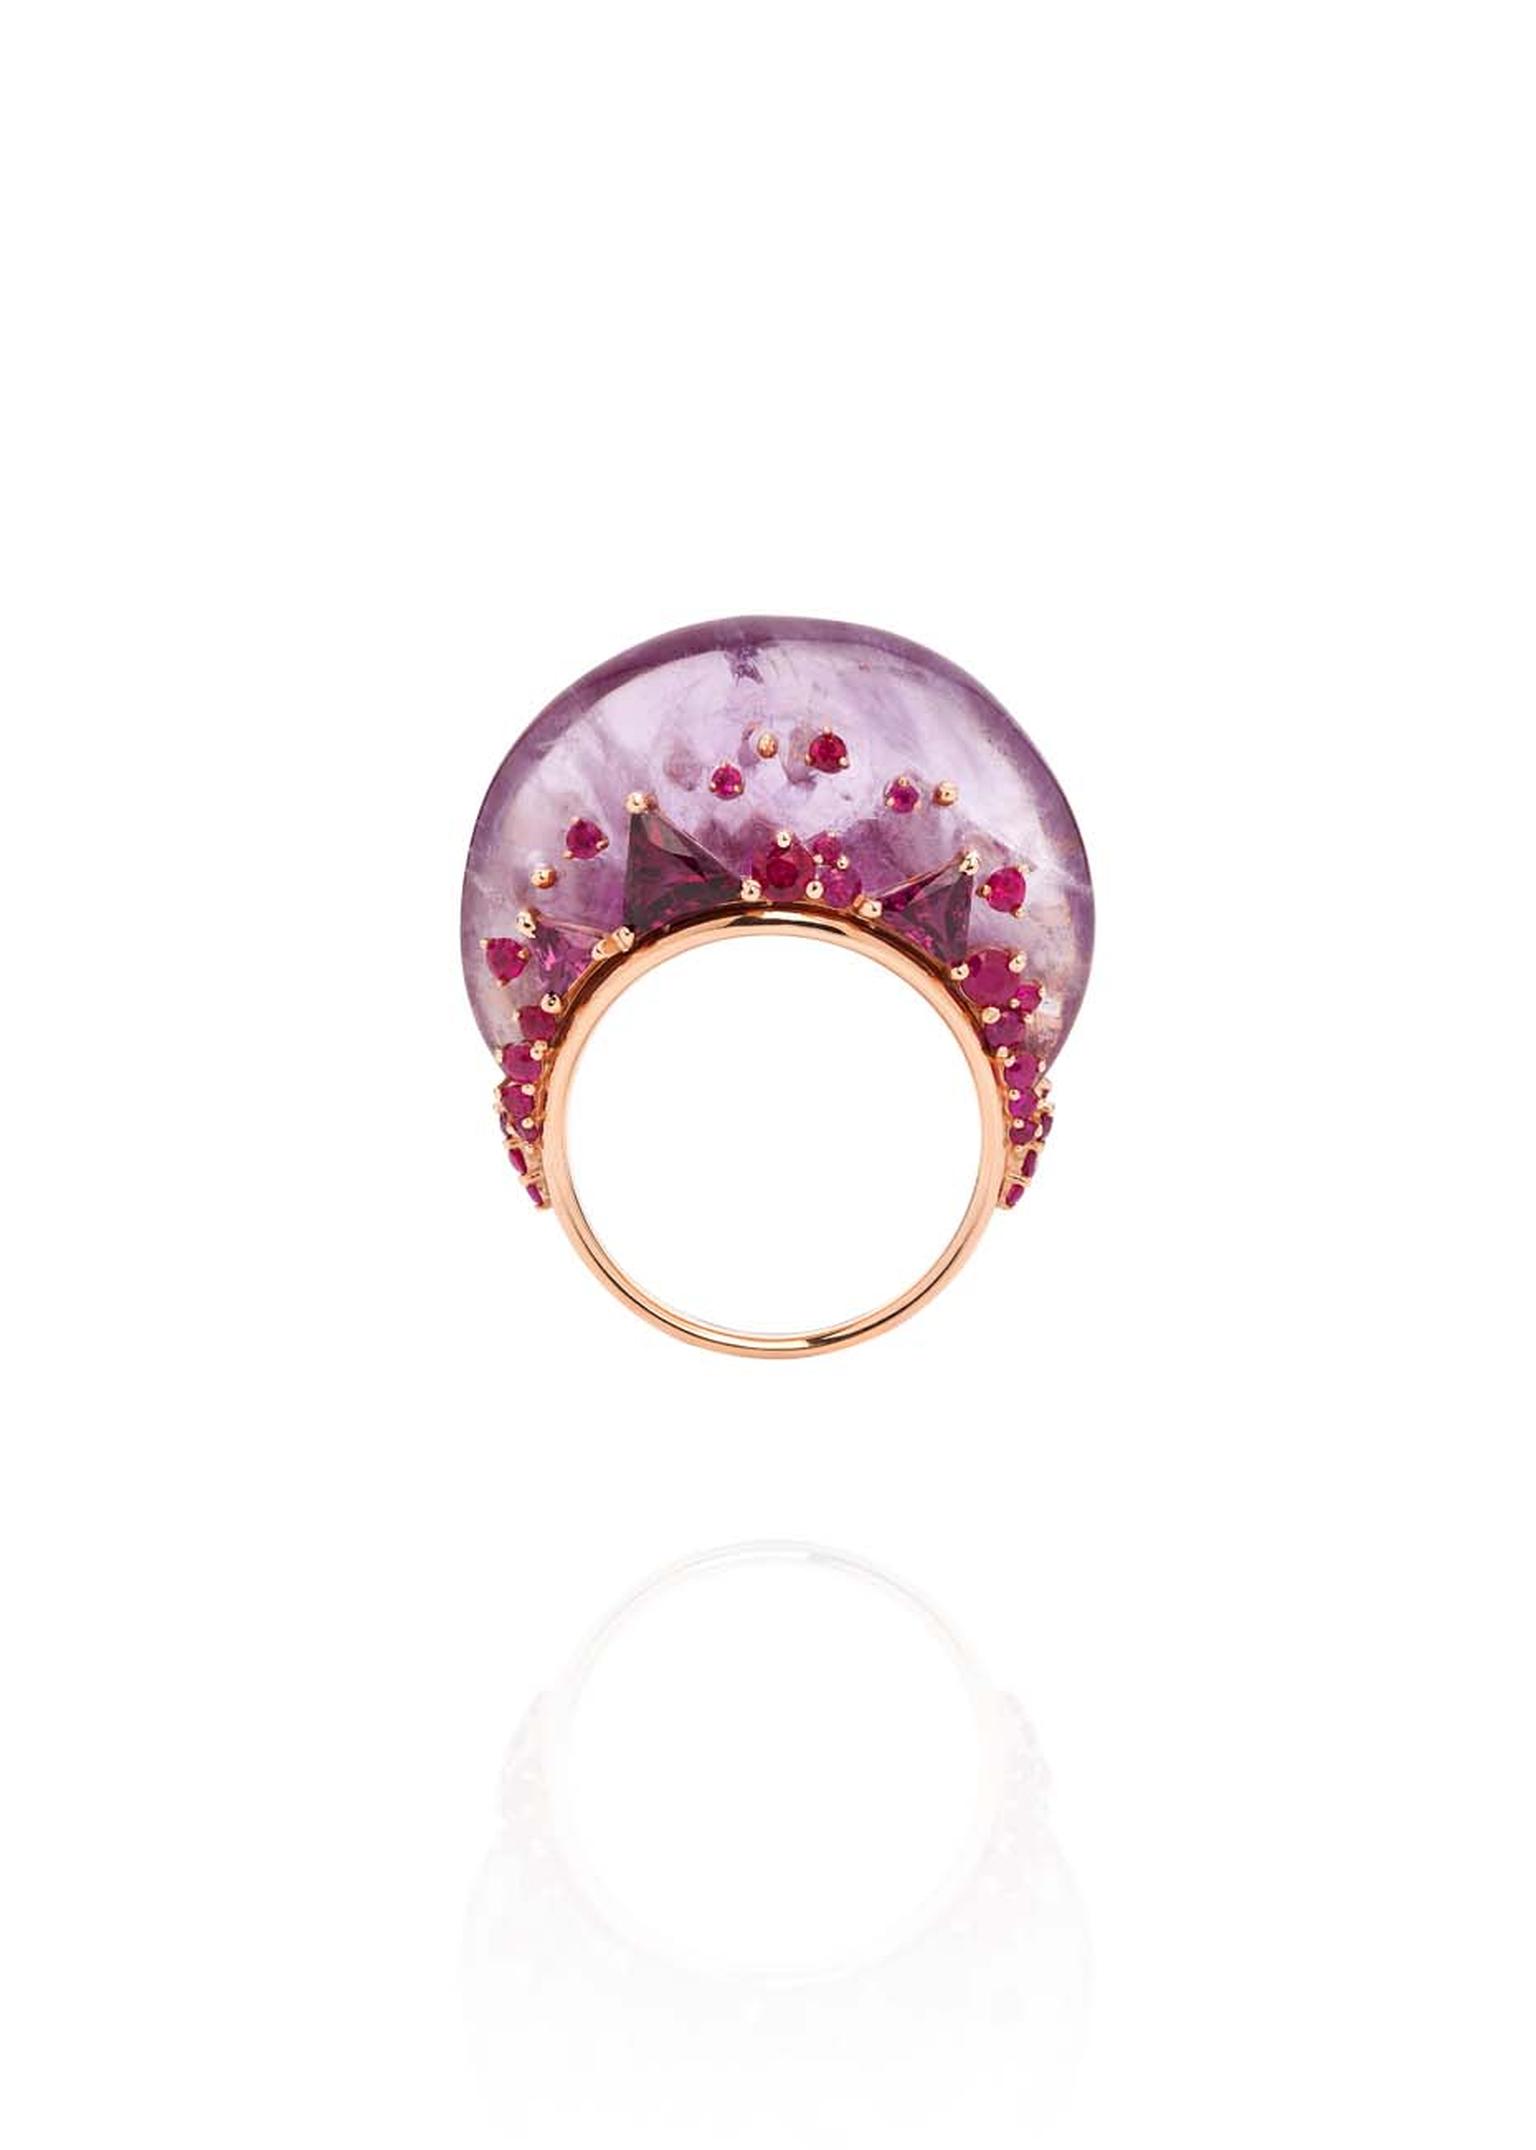 Fernando Jorge Fusion Tall ring in rose gold with rubies, rhodolites and amethyst